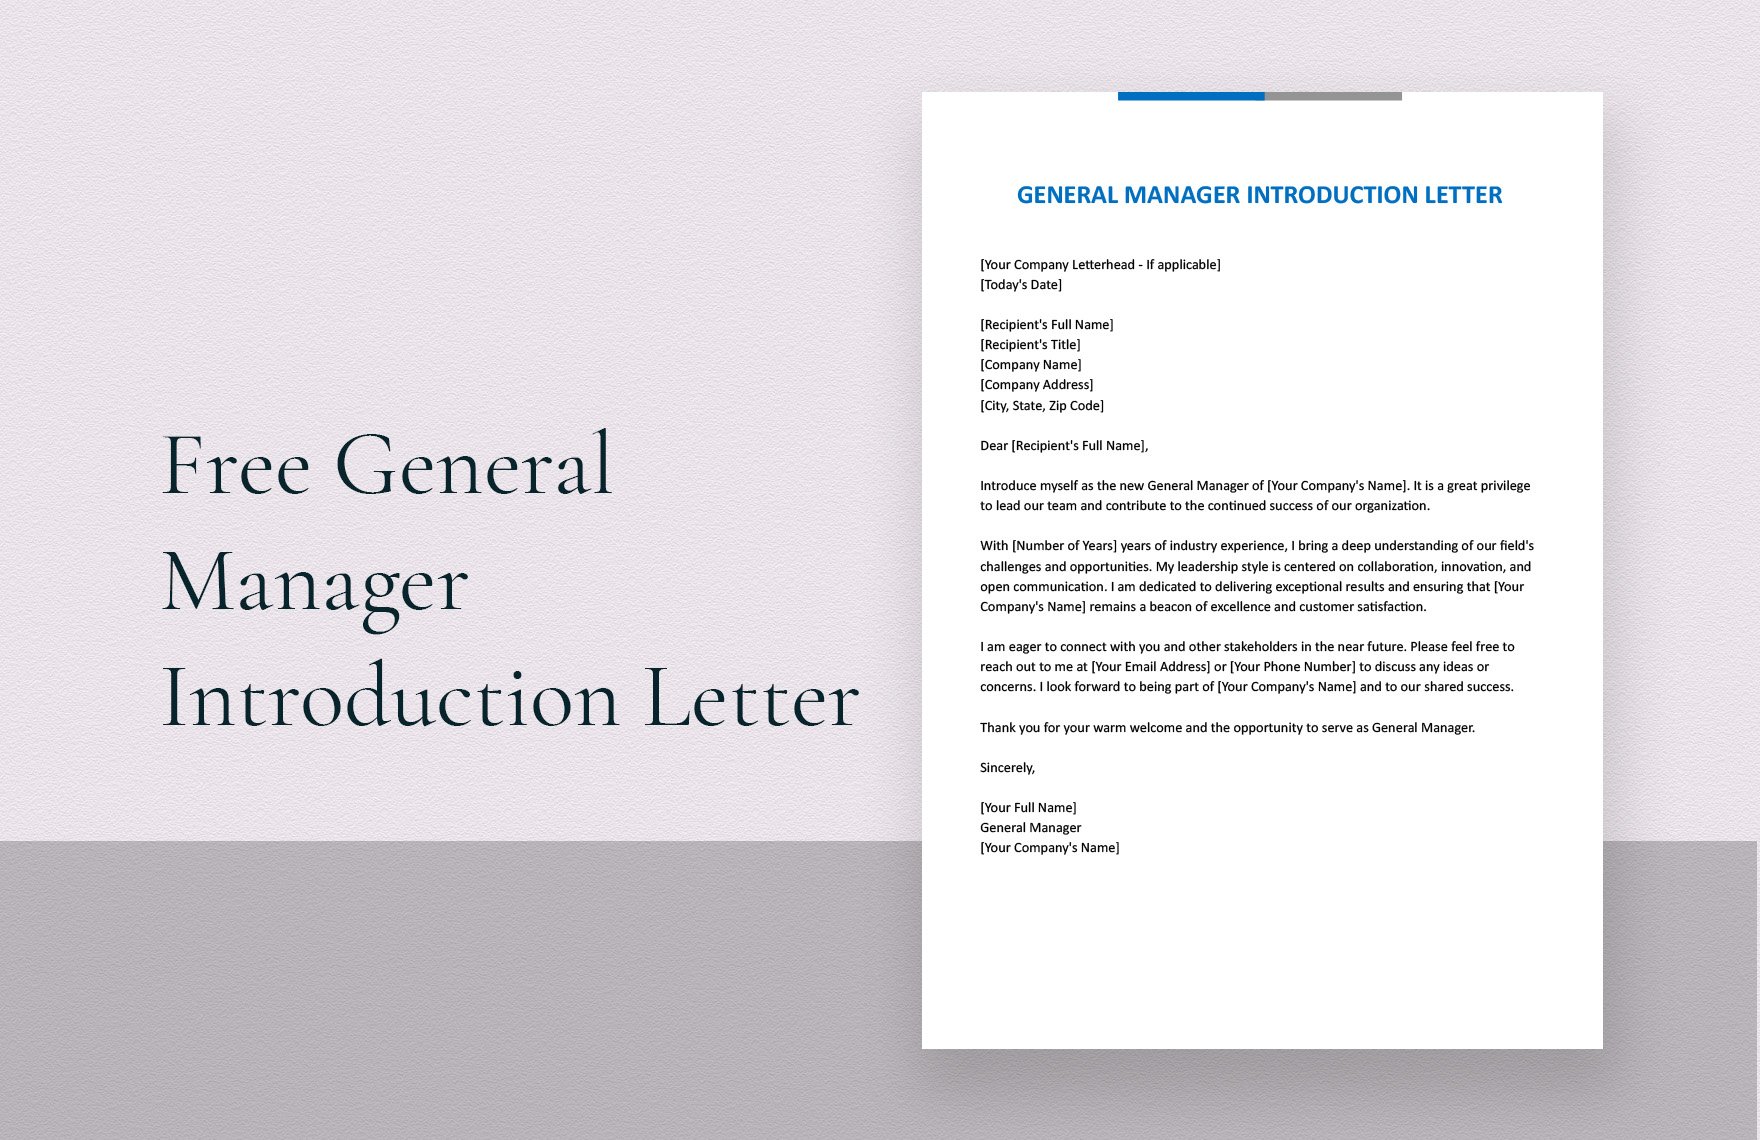 General Manager Introduction Letter